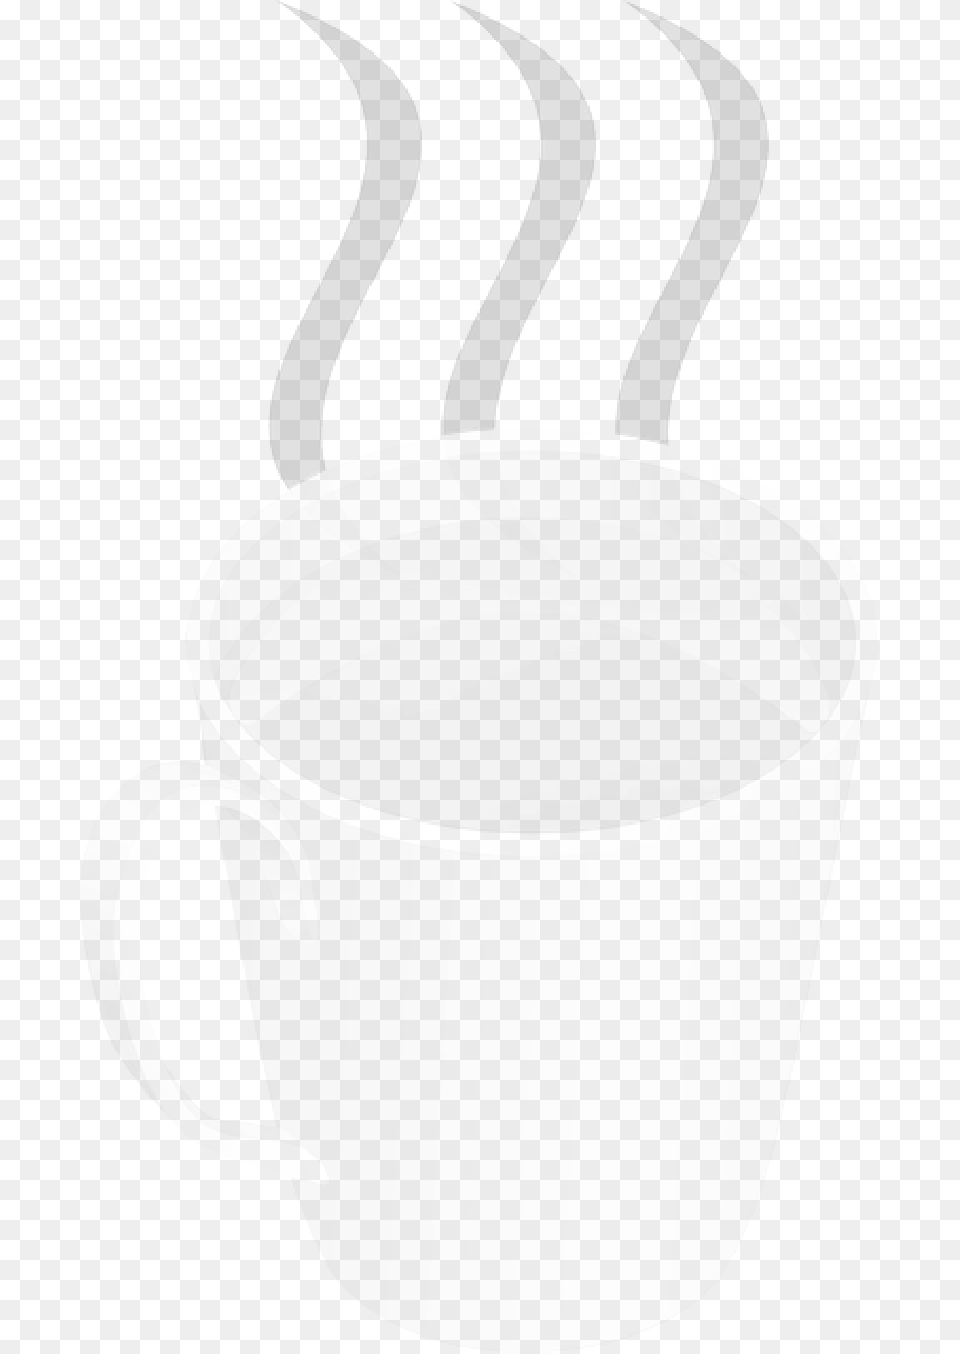 Red Cup Cartoon Hot Mug Coffee Drink Tea Cups Cup, Beverage, Coffee Cup Free Transparent Png